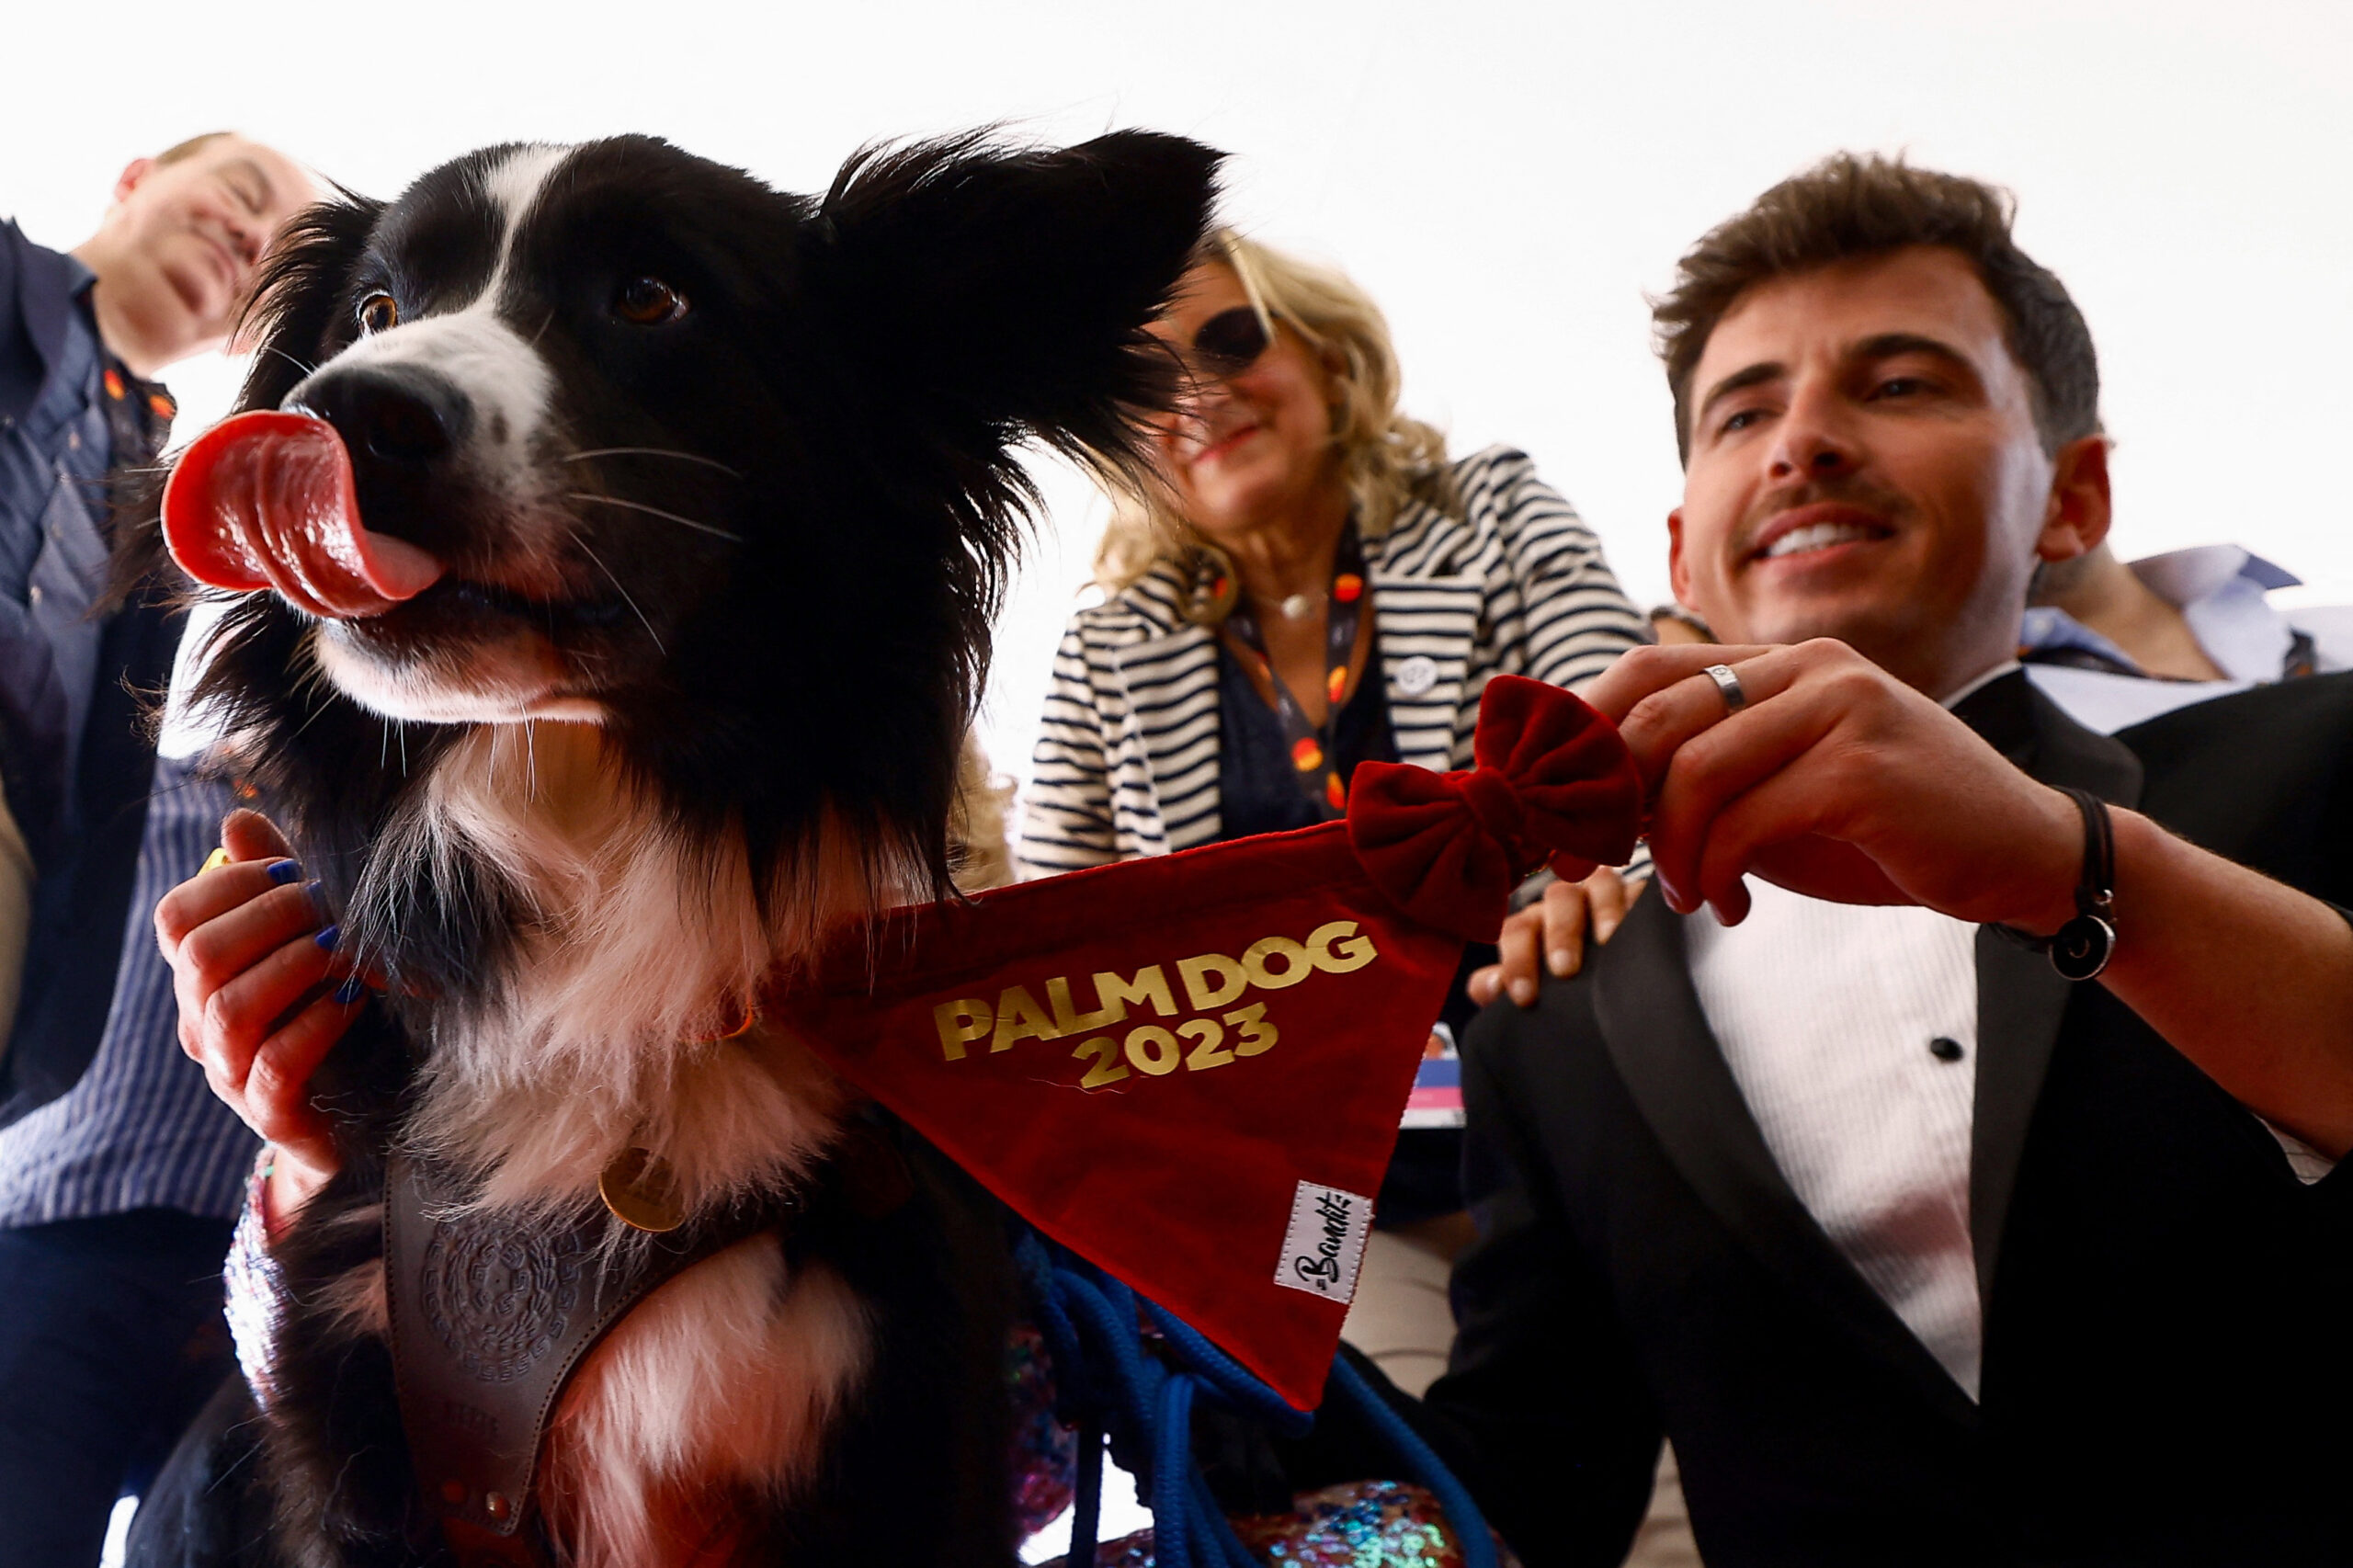 The 76th Cannes Film Festival - The Palm Dog Awards - Cannes, France, May 26, 2023. Stan, a Border Collie, receives the Palm Dog award on-behalf of the dog named Snoop of the film "Anatomie d'une chute" (Anatomy of a Fall). REUTERS/Eric Gaillard